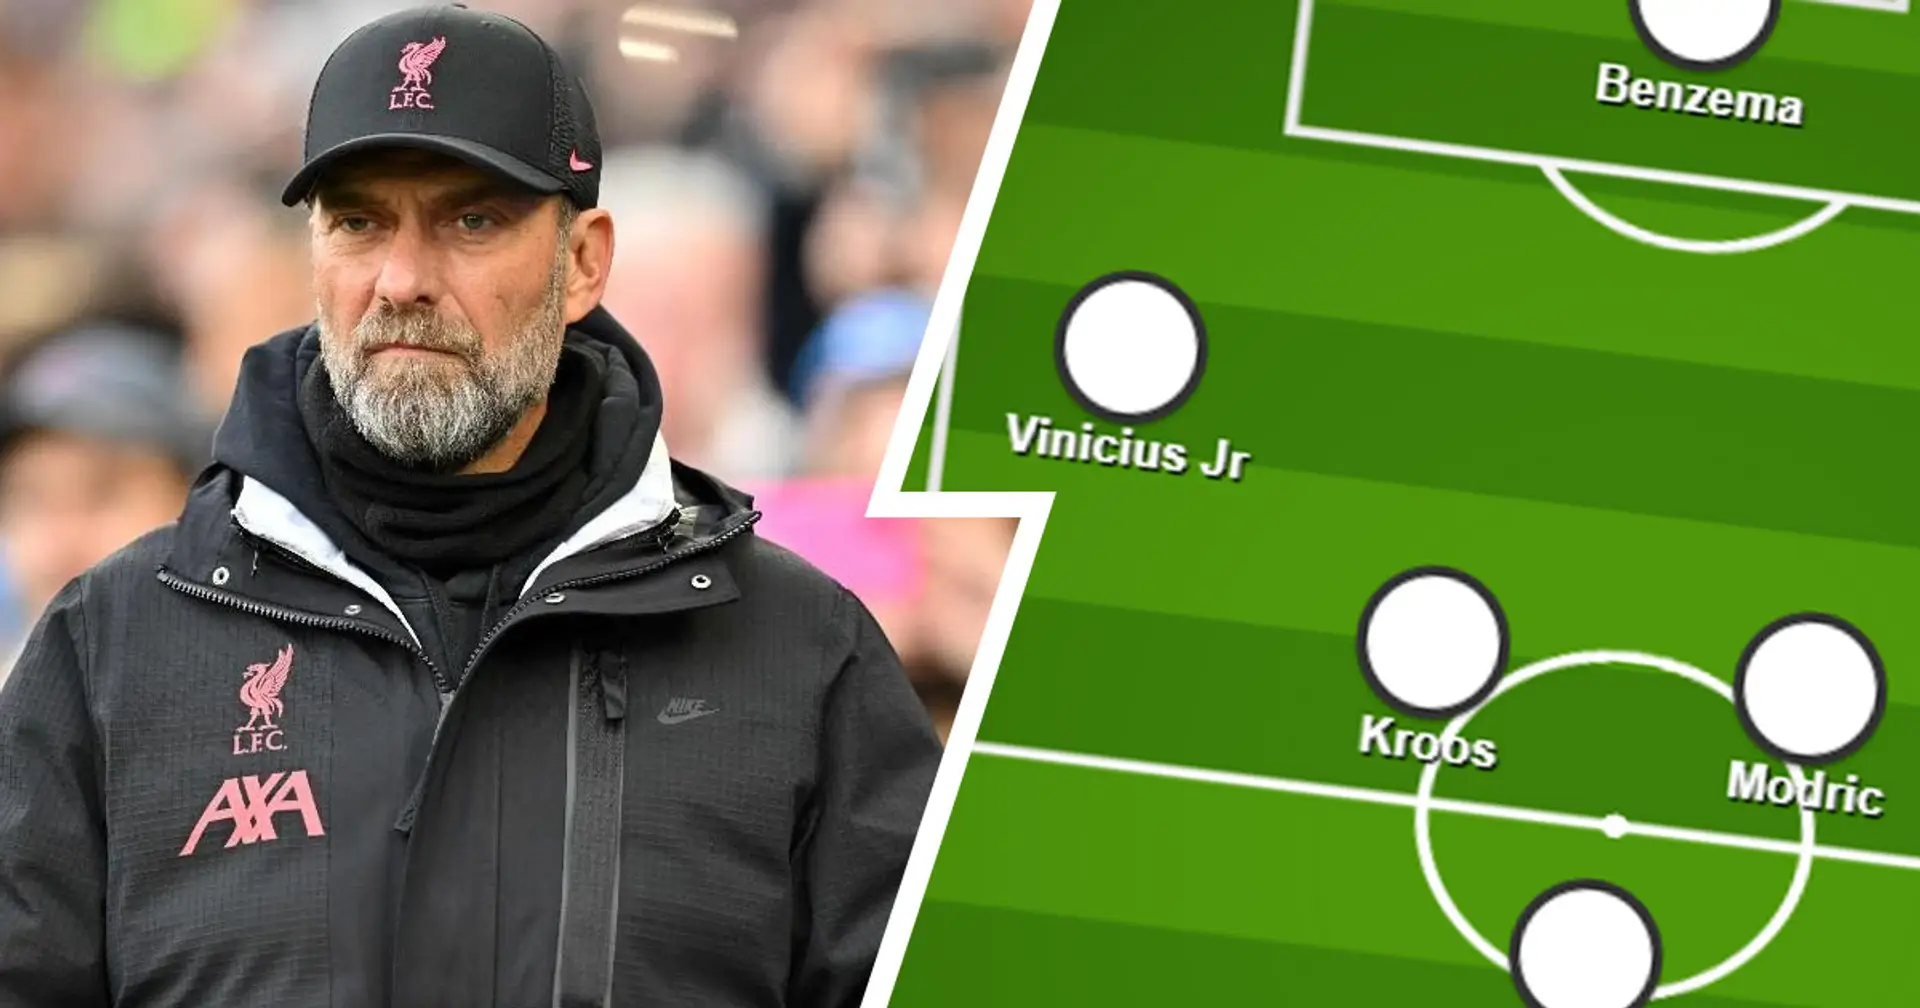 Klopp missing key midfielder: team news and probable lineups for Real Madrid v Liverpool